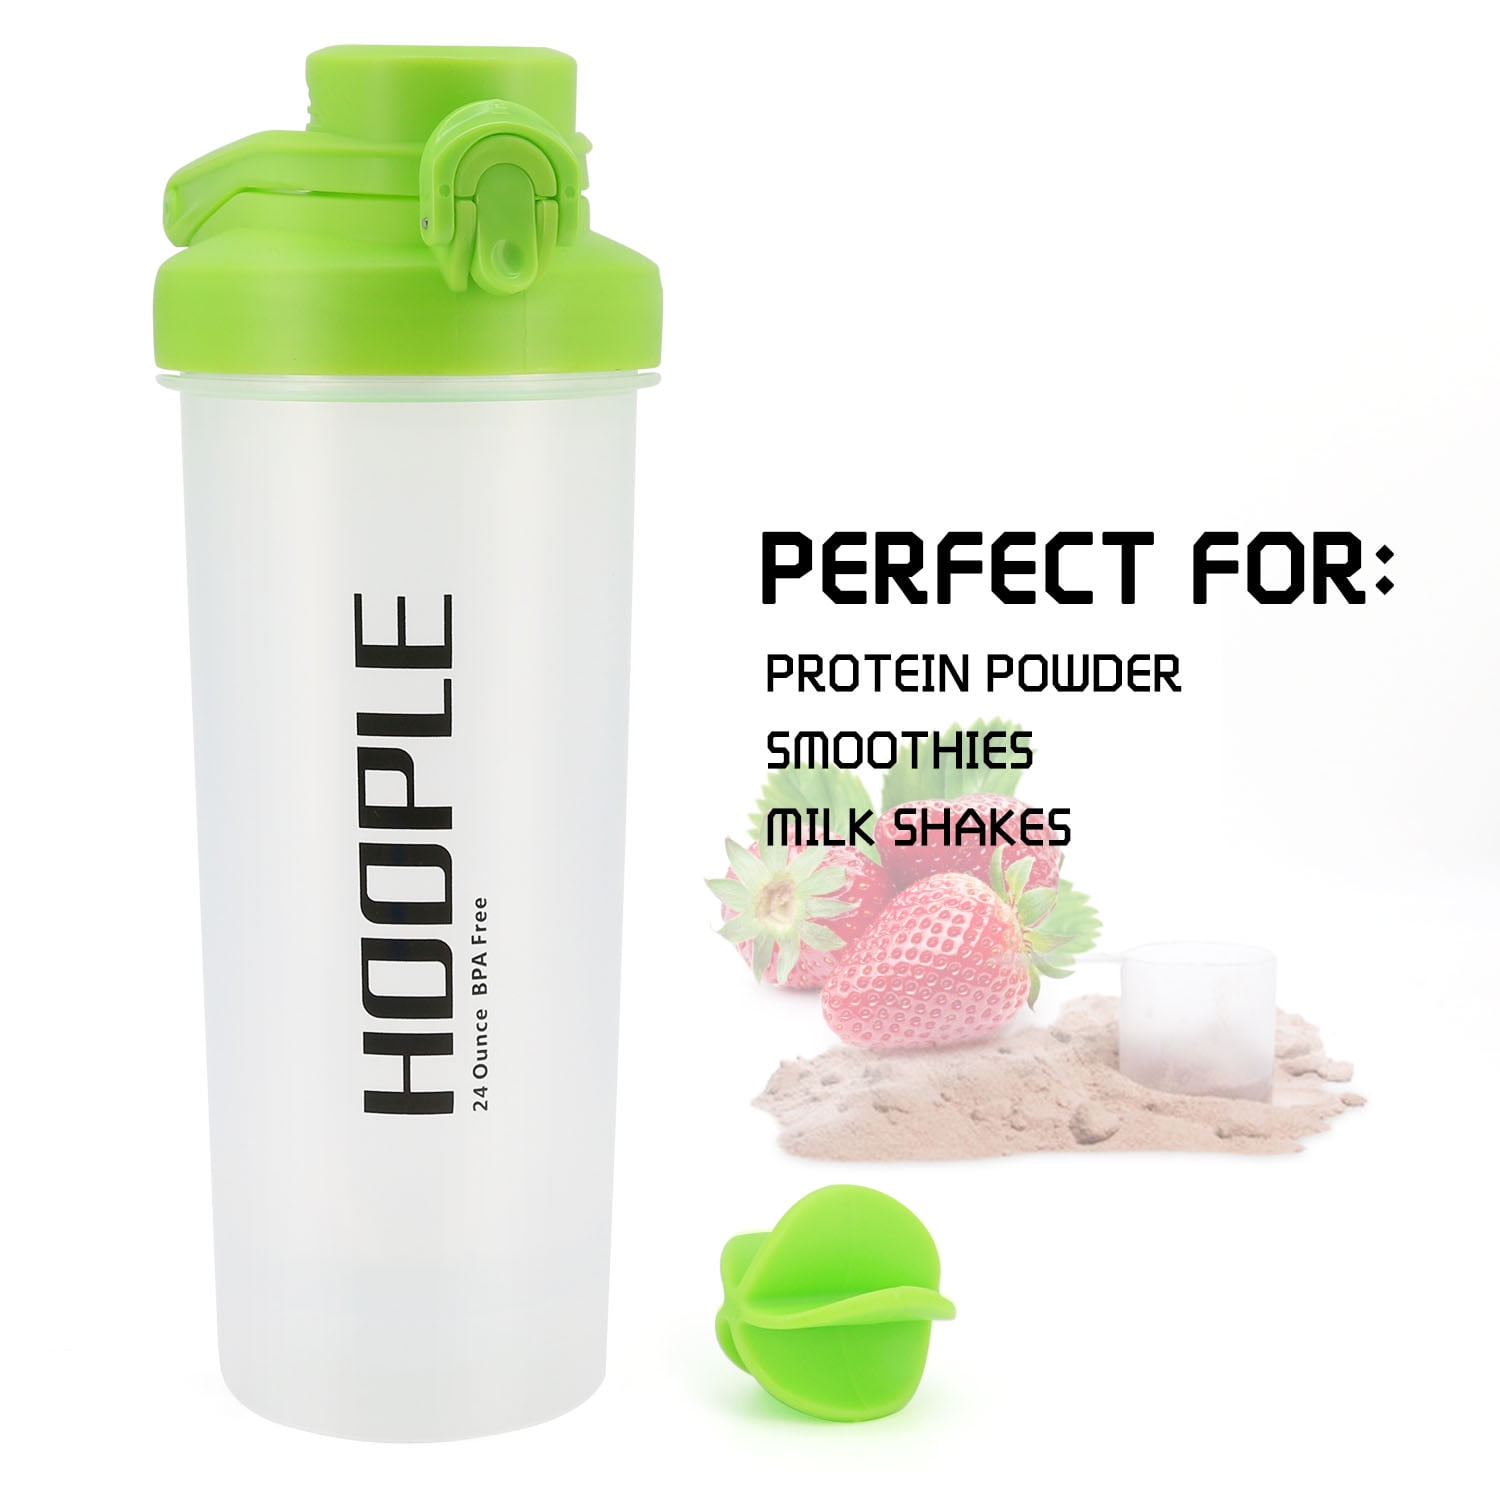 Auto-Flip Shaker Bottle 4 Pack for Protein Mixes Cups Powder Blender Smoothie Shakes BPA Free Small Shake with Powerful Mixing Ball - 24 Ounce (4